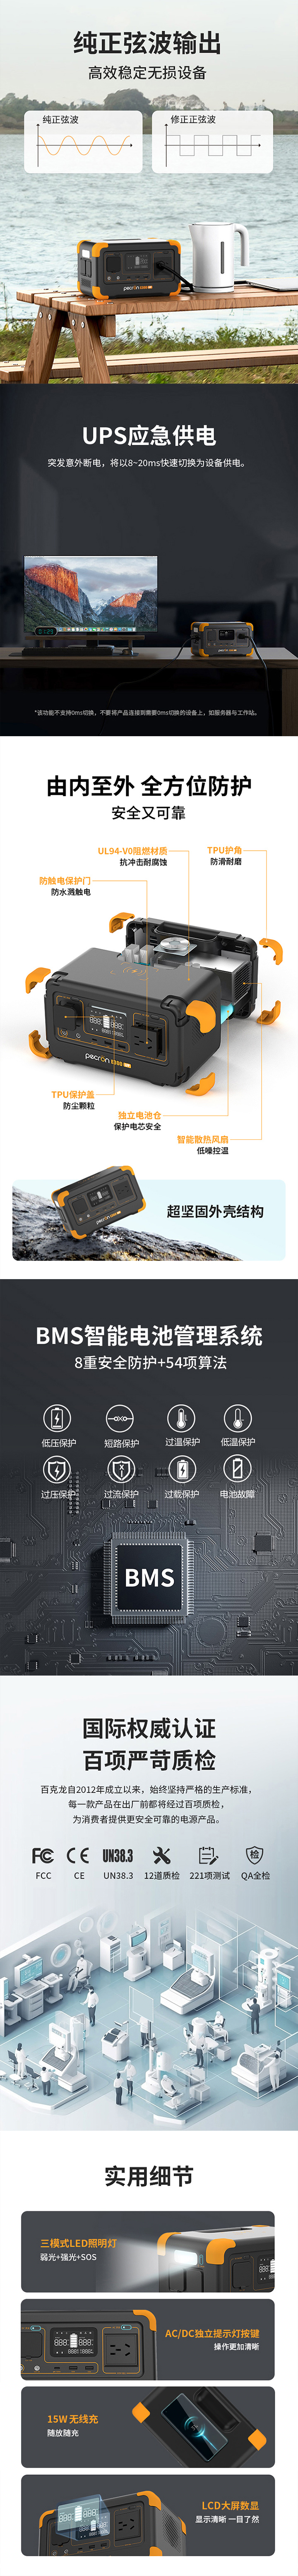  Free trial and evaluation of Bacron E300LFP outdoor power supply